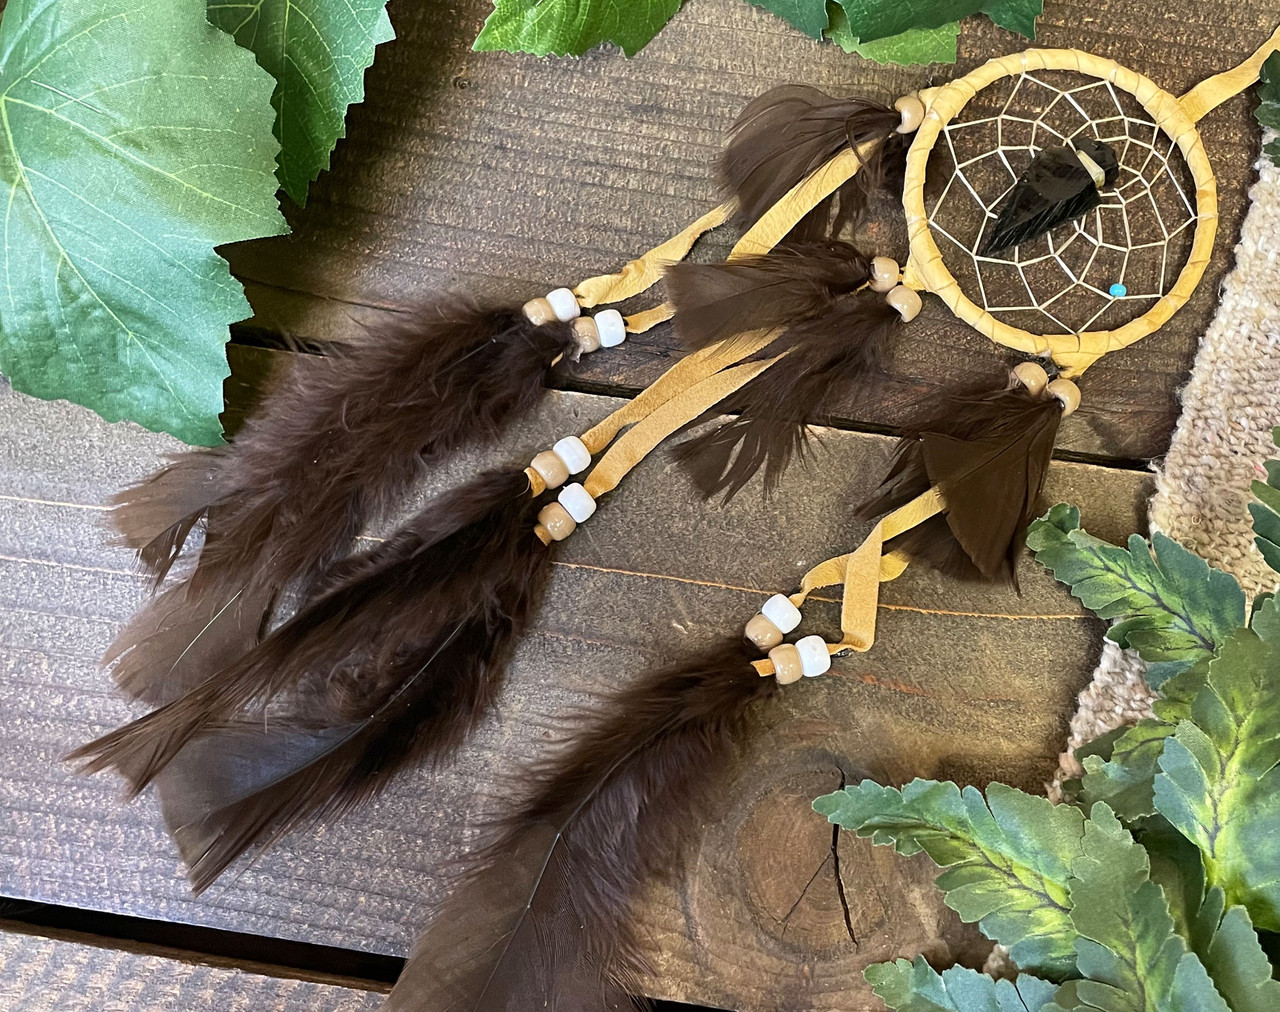 Pair Of Native Indian Brown Dream-catcher Feathers Patch